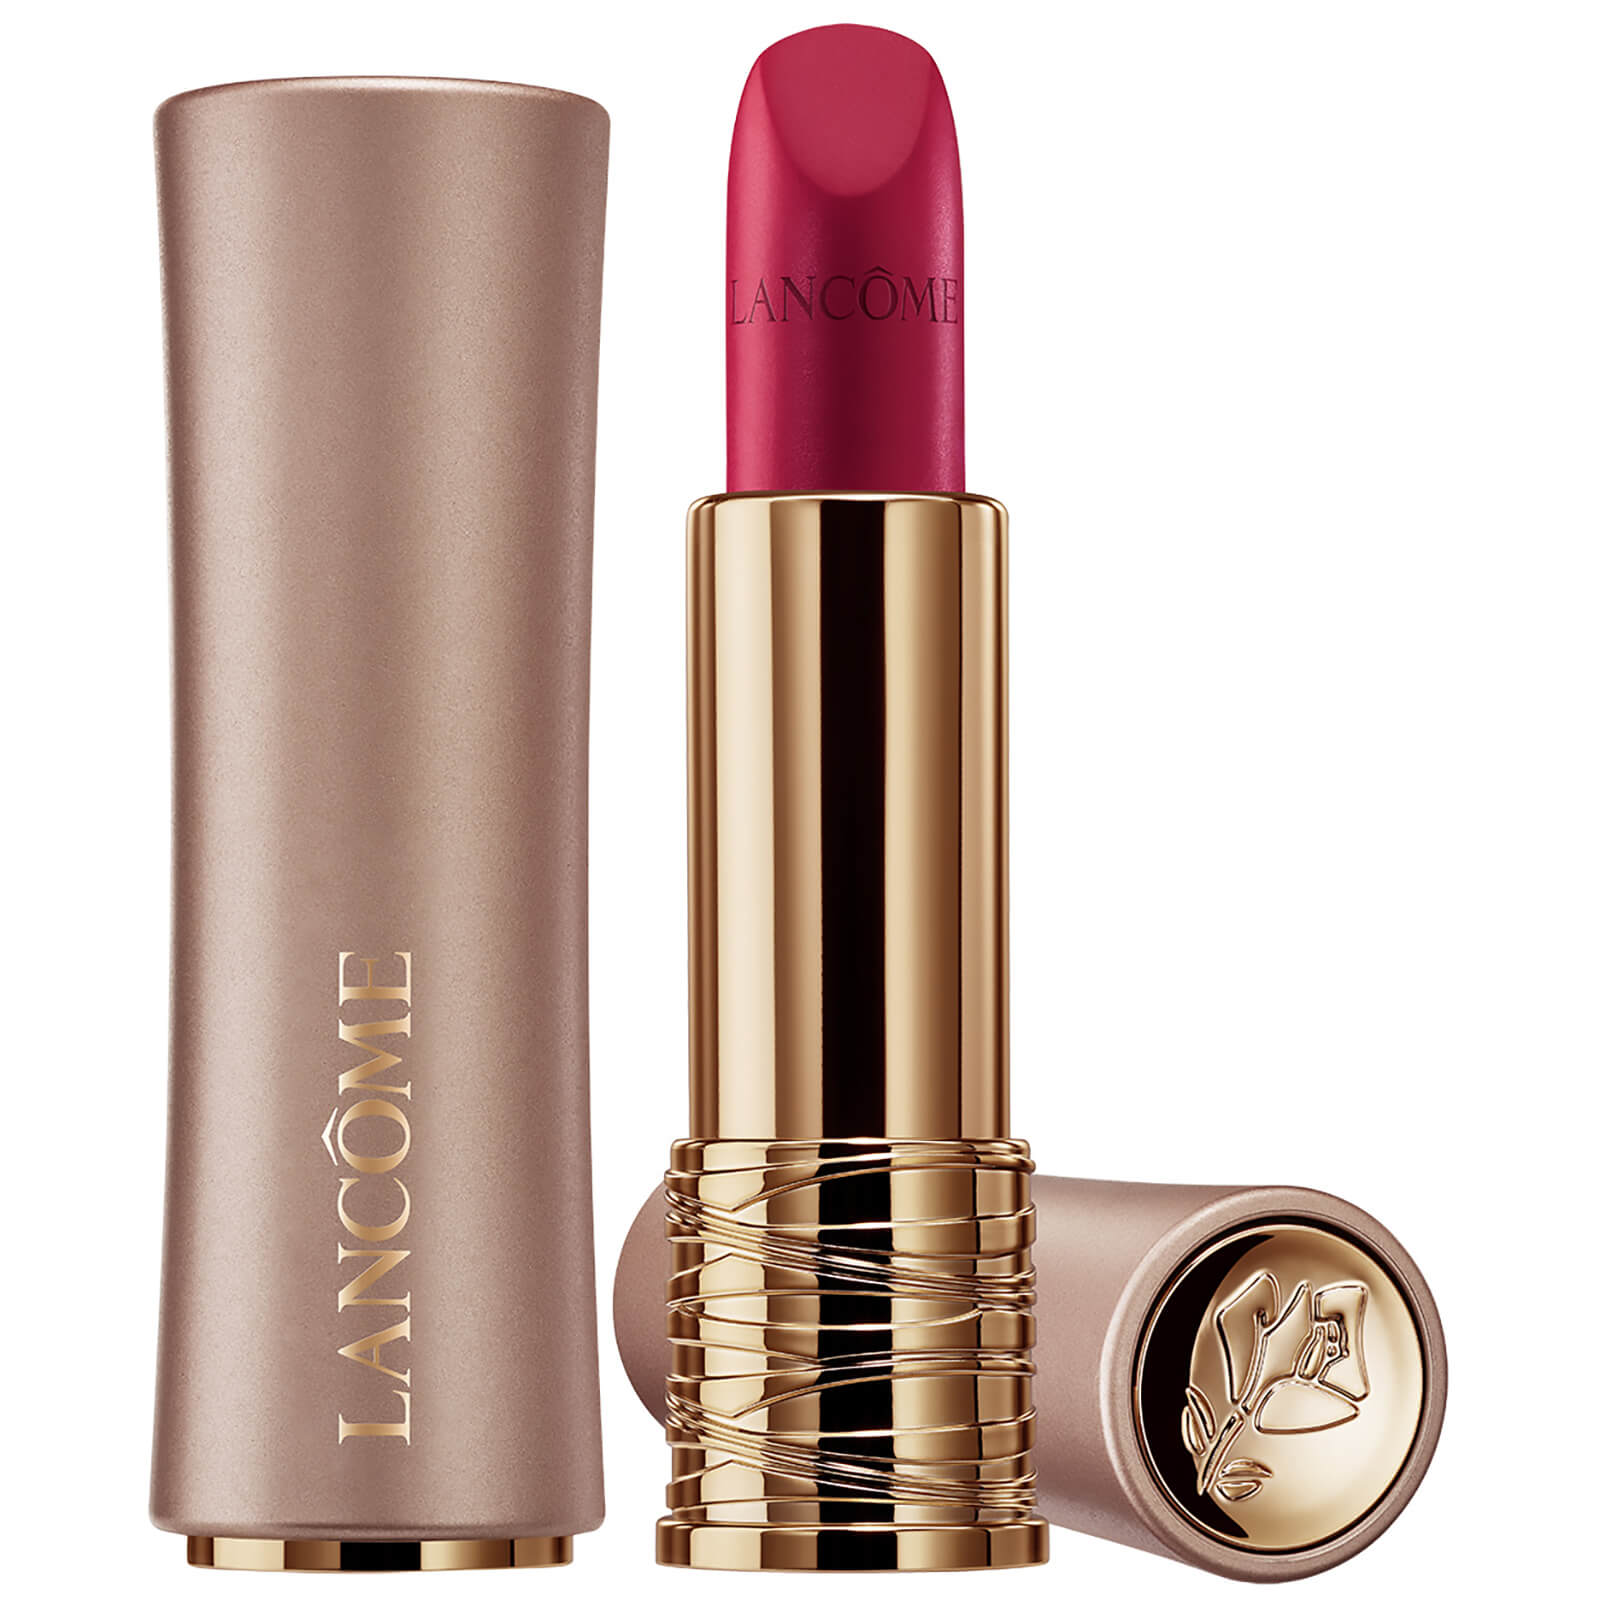 Lancome L'Absolu Rouge Intimatte Lipstick 3.4ml (Various Shades) - 525 French Bisou